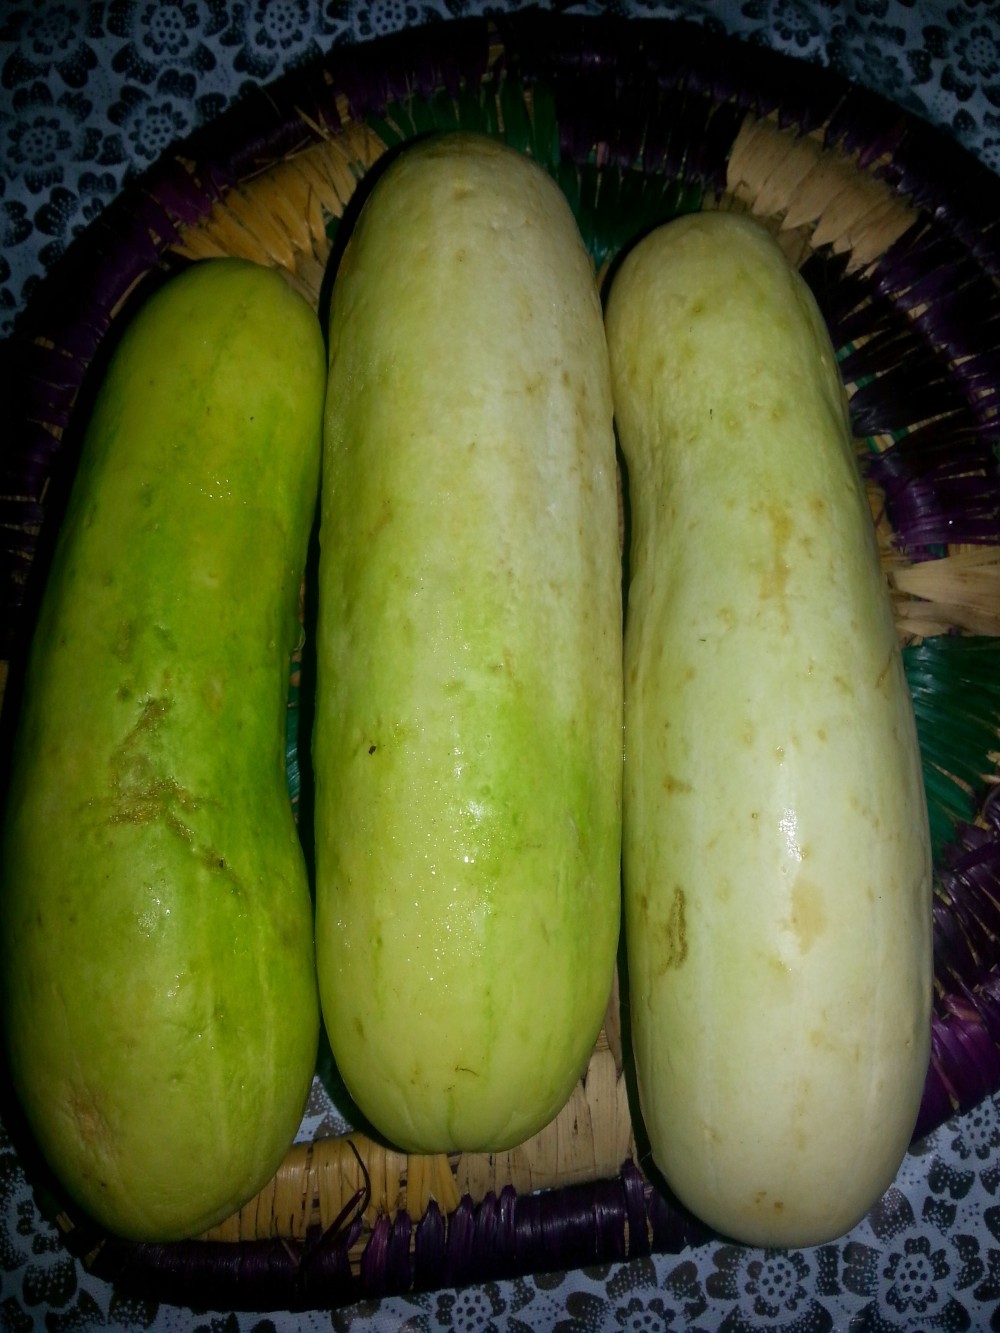 The pale green version of cucumber